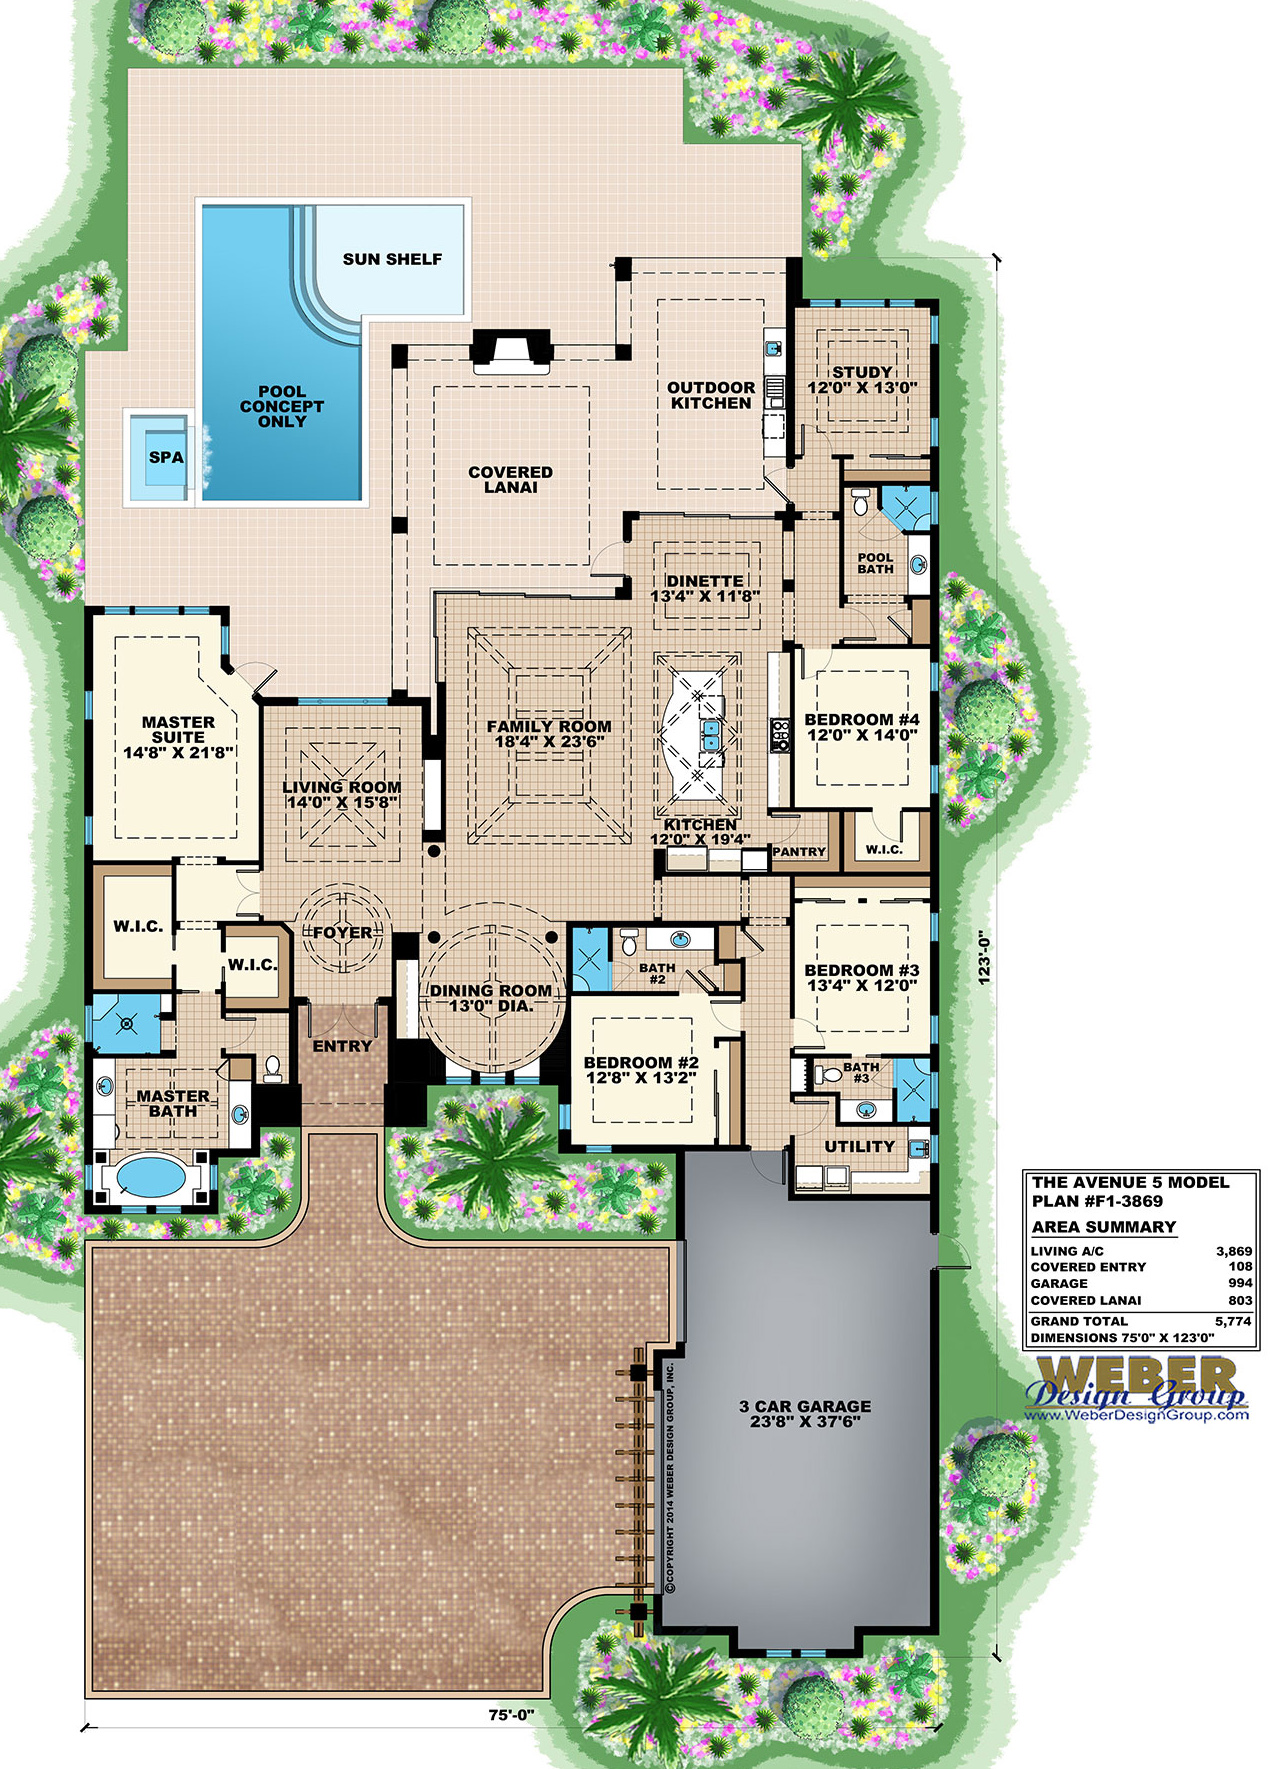 1 Story House Plans: One Story Modern Luxury Home Floor Plans